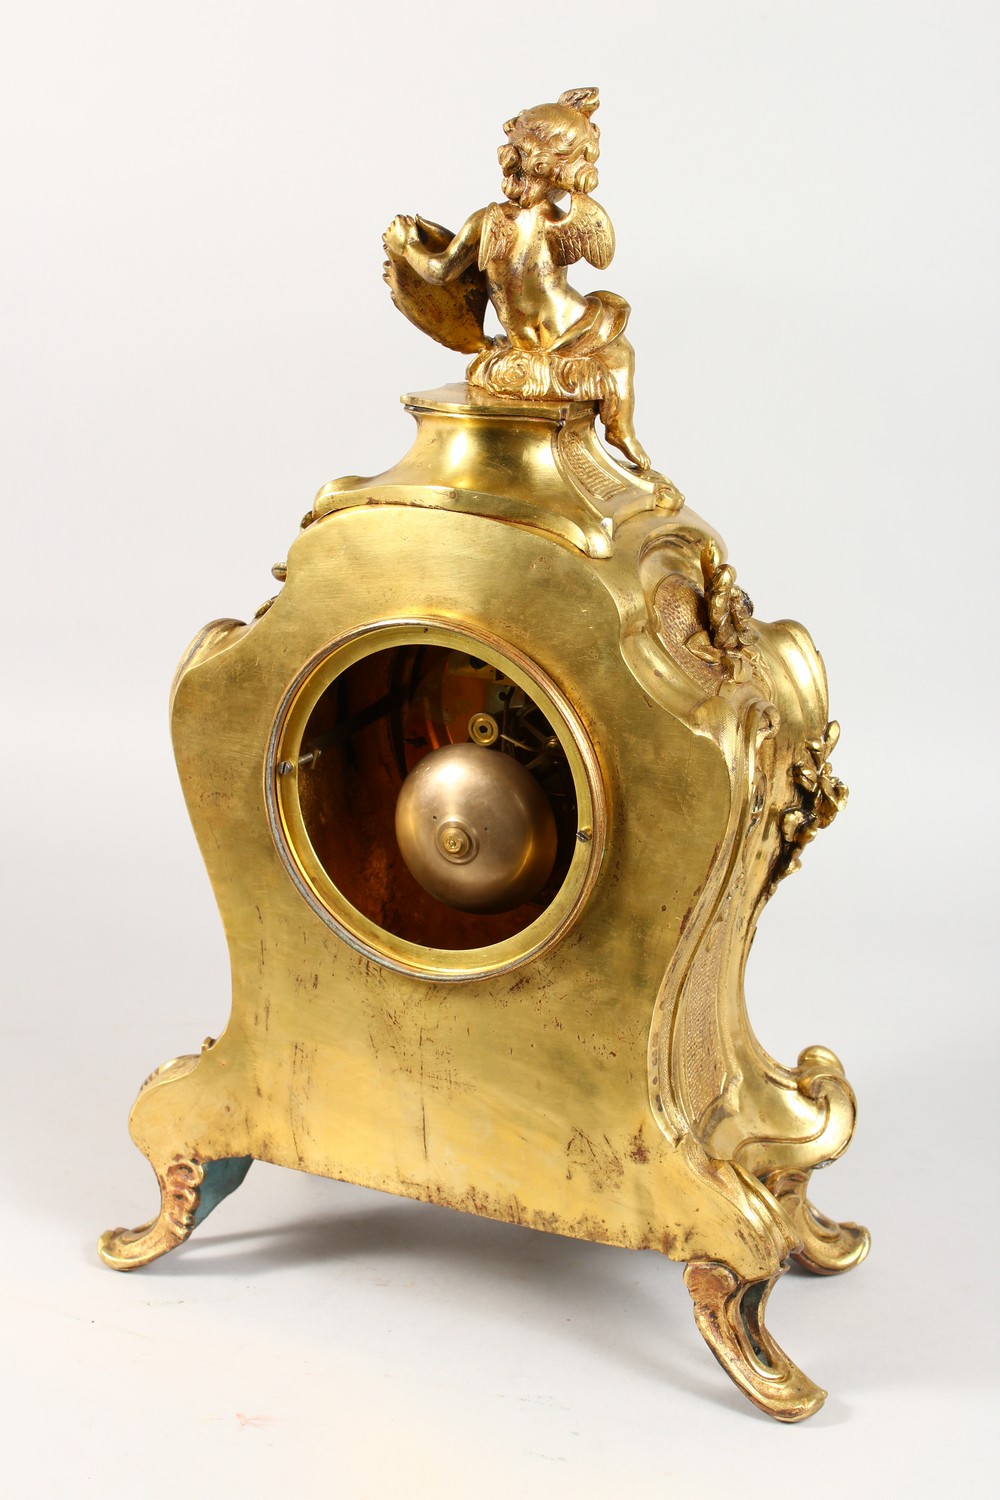 A GOOD LOUIS XVI HEAVY ORMOLU CLOCK by LEROUX, LE MANS, the case with cupids, scrolls, acanthus - Image 4 of 9